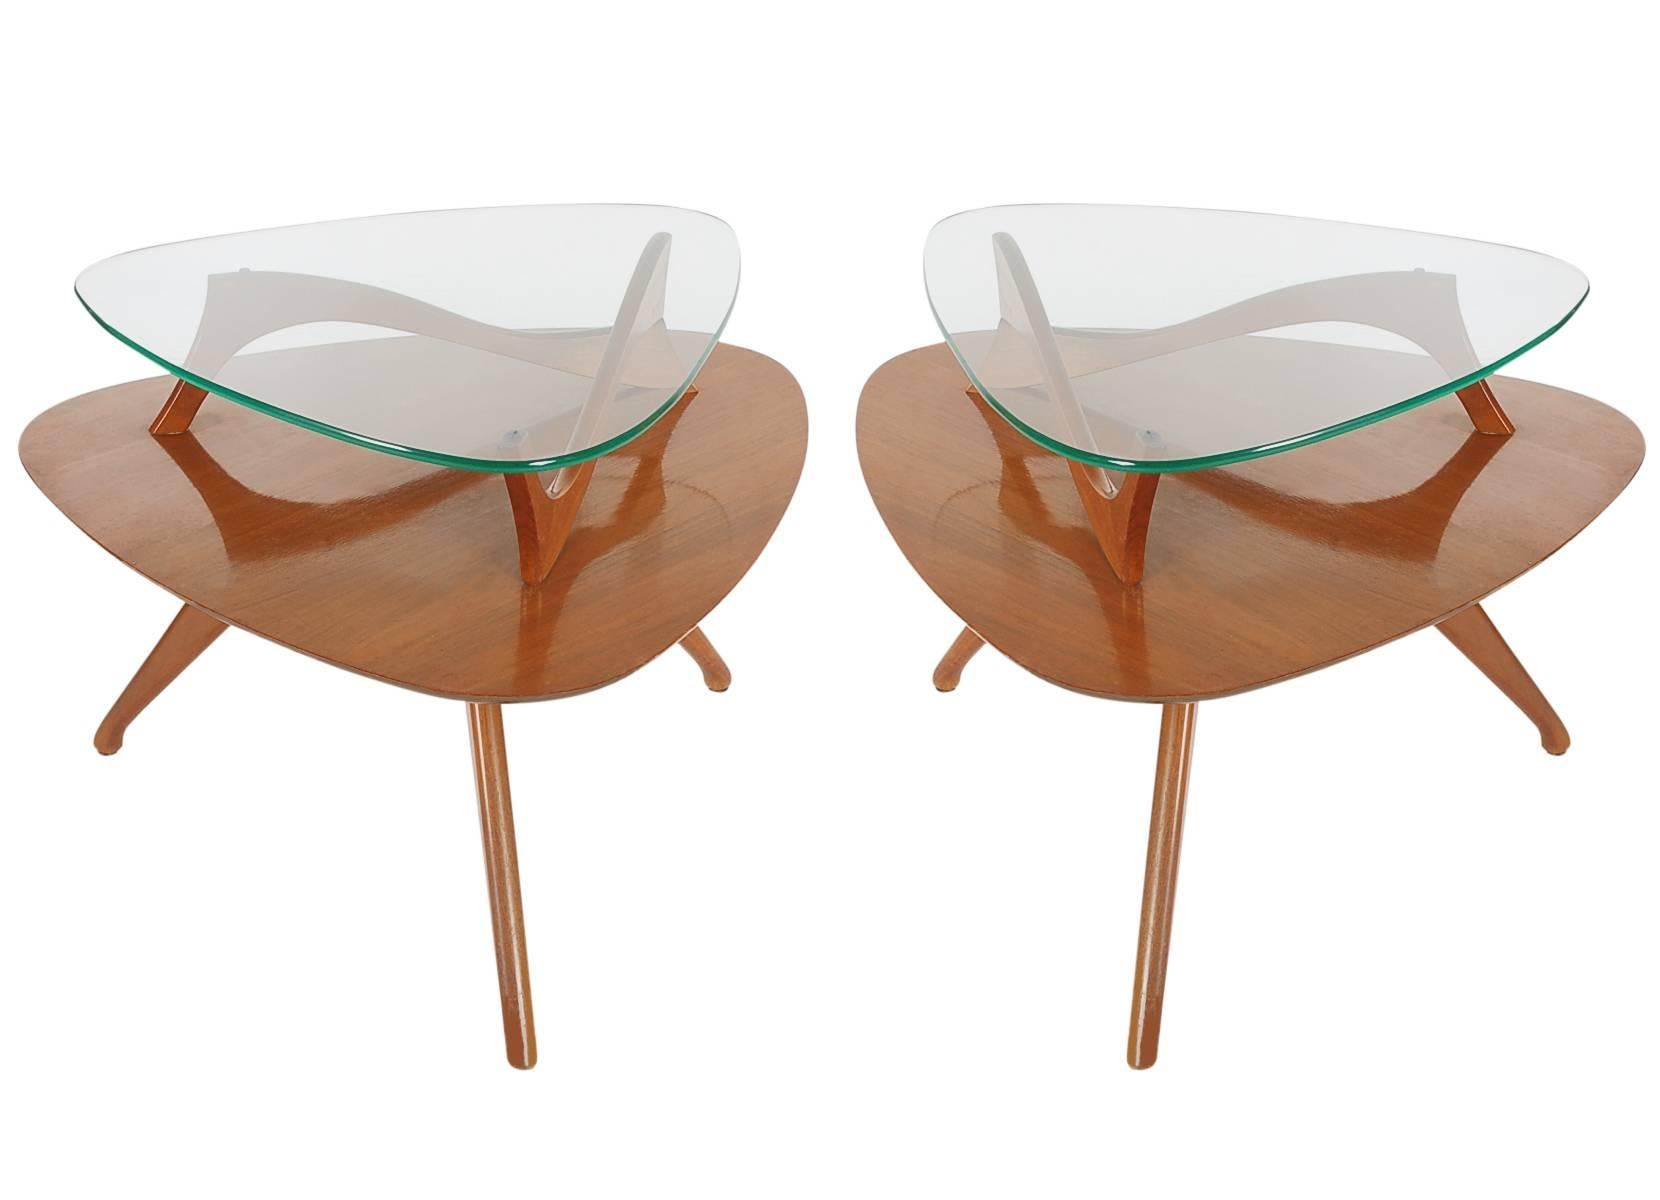 An unusual matching pair of two-tier end tables from the 1960's. They feature walnut construction with floating glass tops. 

In the style of: Adrian Pearsall, Gio Ponti